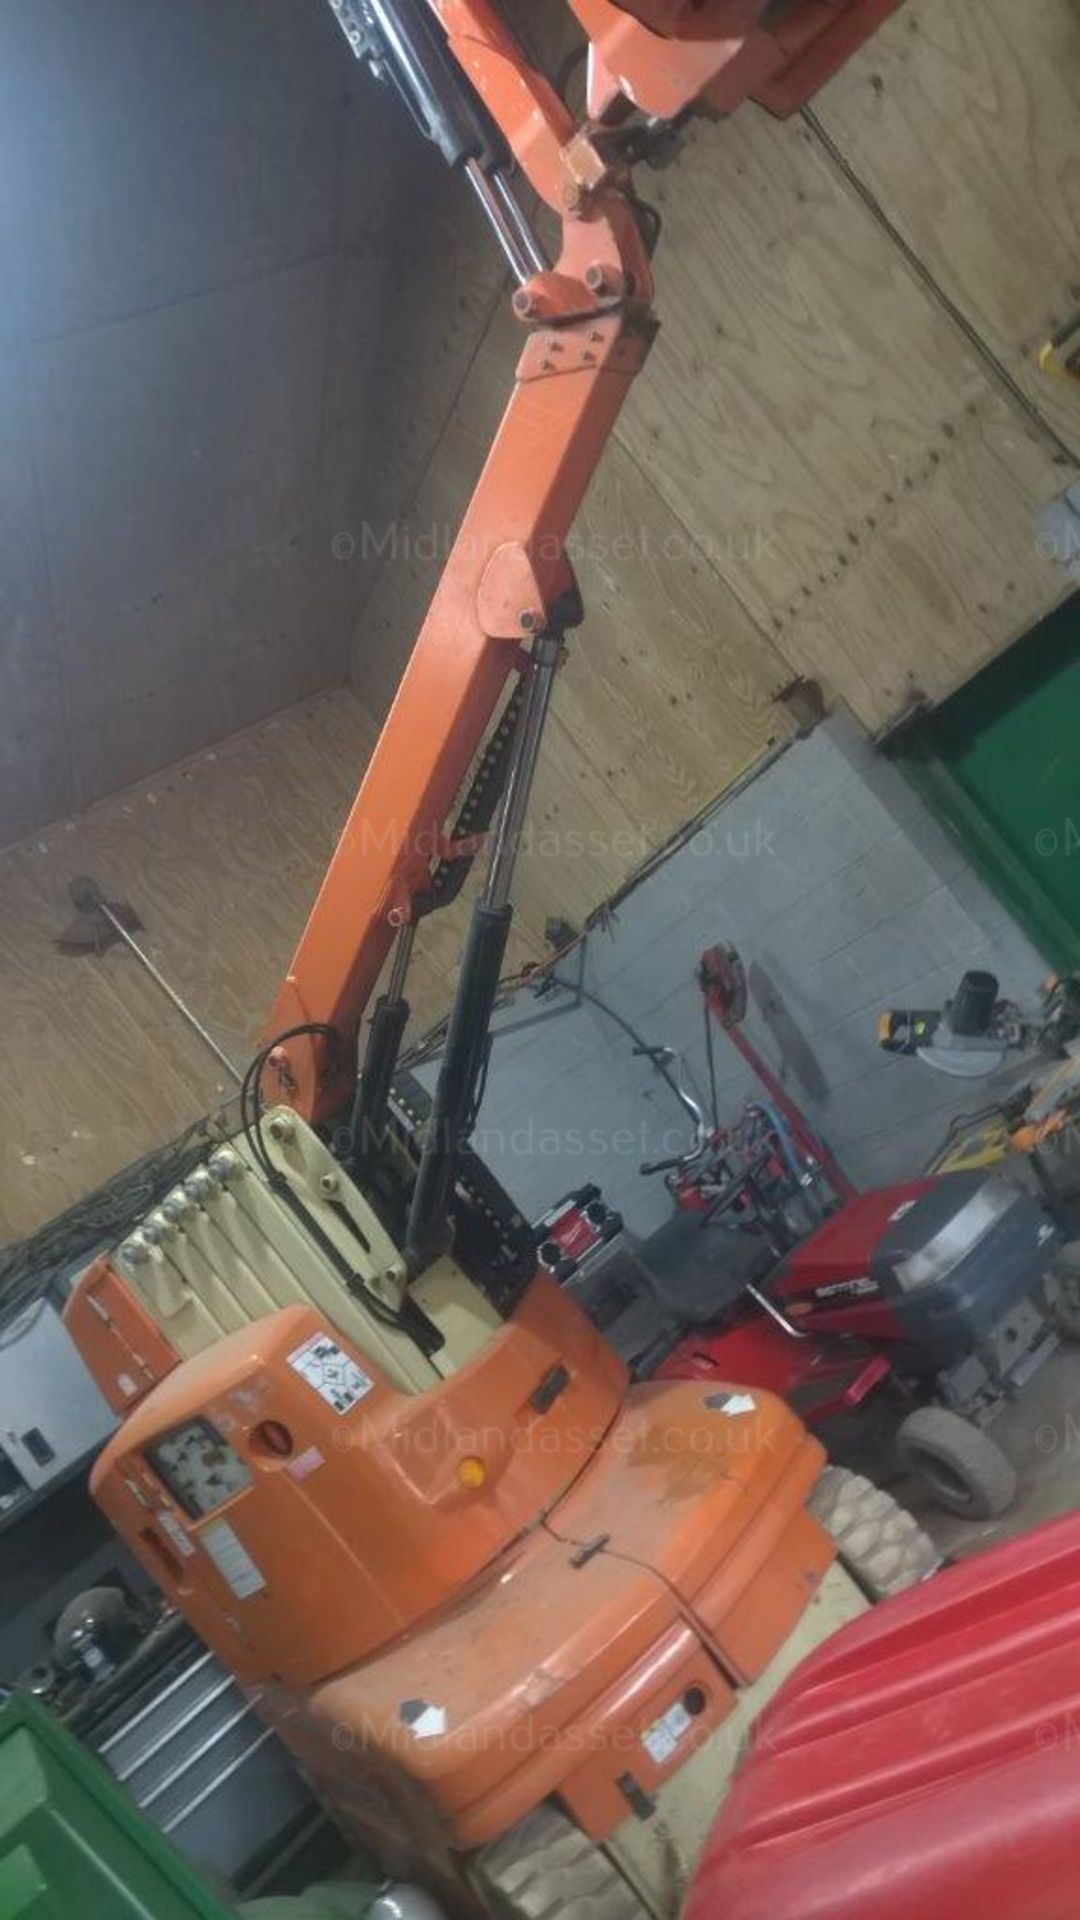 DS - 2005 TOUCAN 1210 ELECTRIC BOOM LIFT   MODEL: 1210 OCCUPANTS: 2 WORKING HEIGHT: 12 METRES - Image 3 of 8